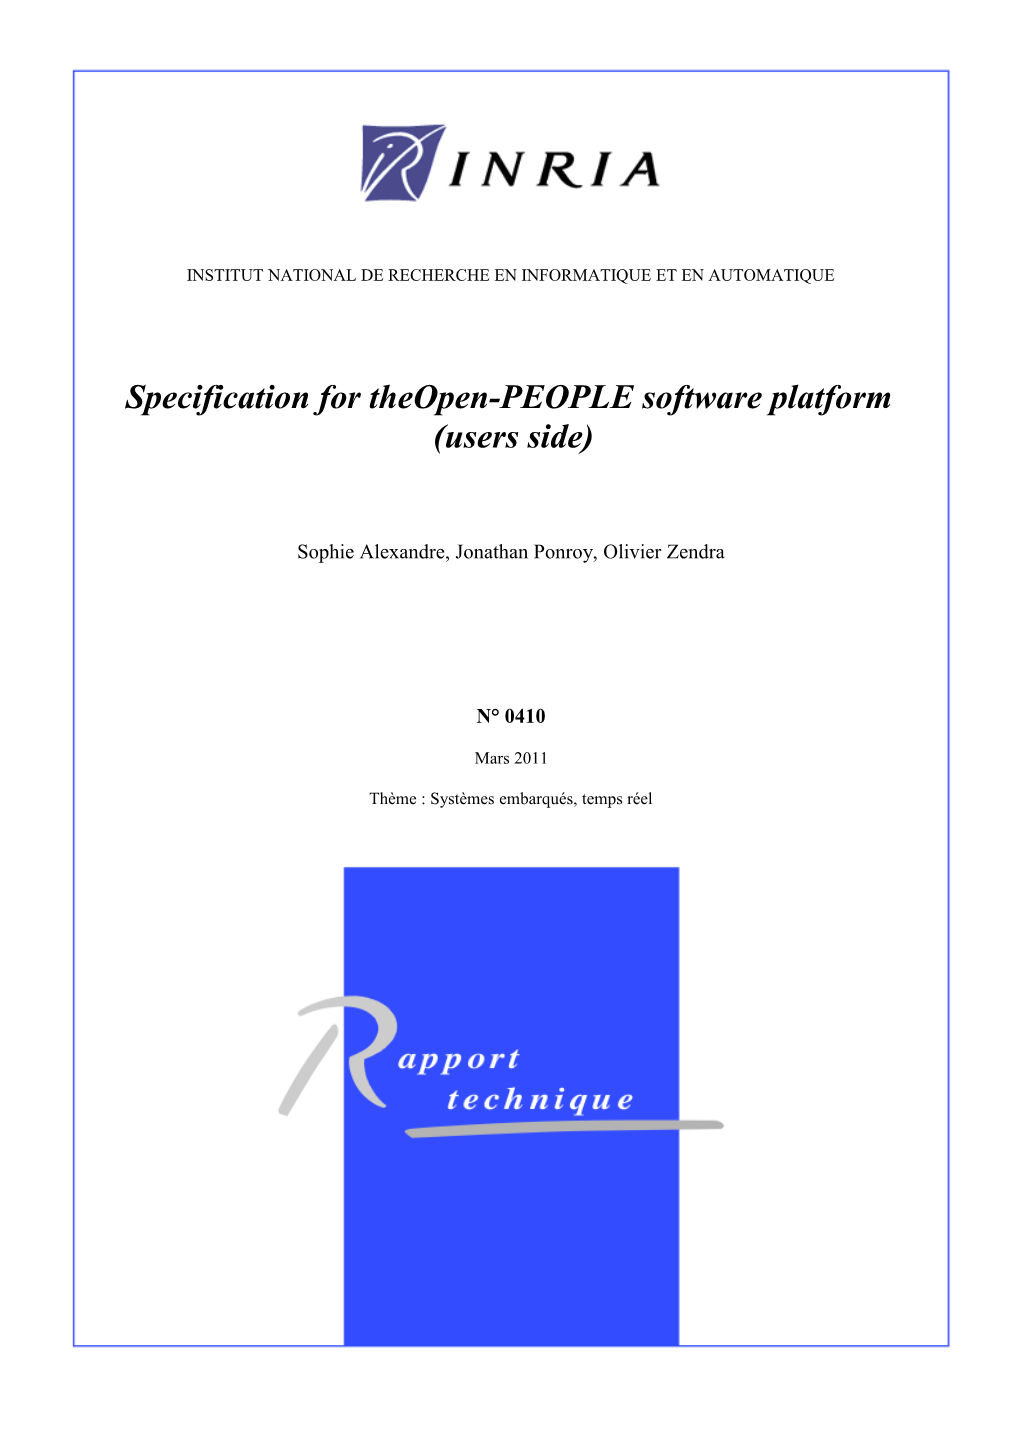 Specification for the Open-PEOPLE Software Platform (Users Side)